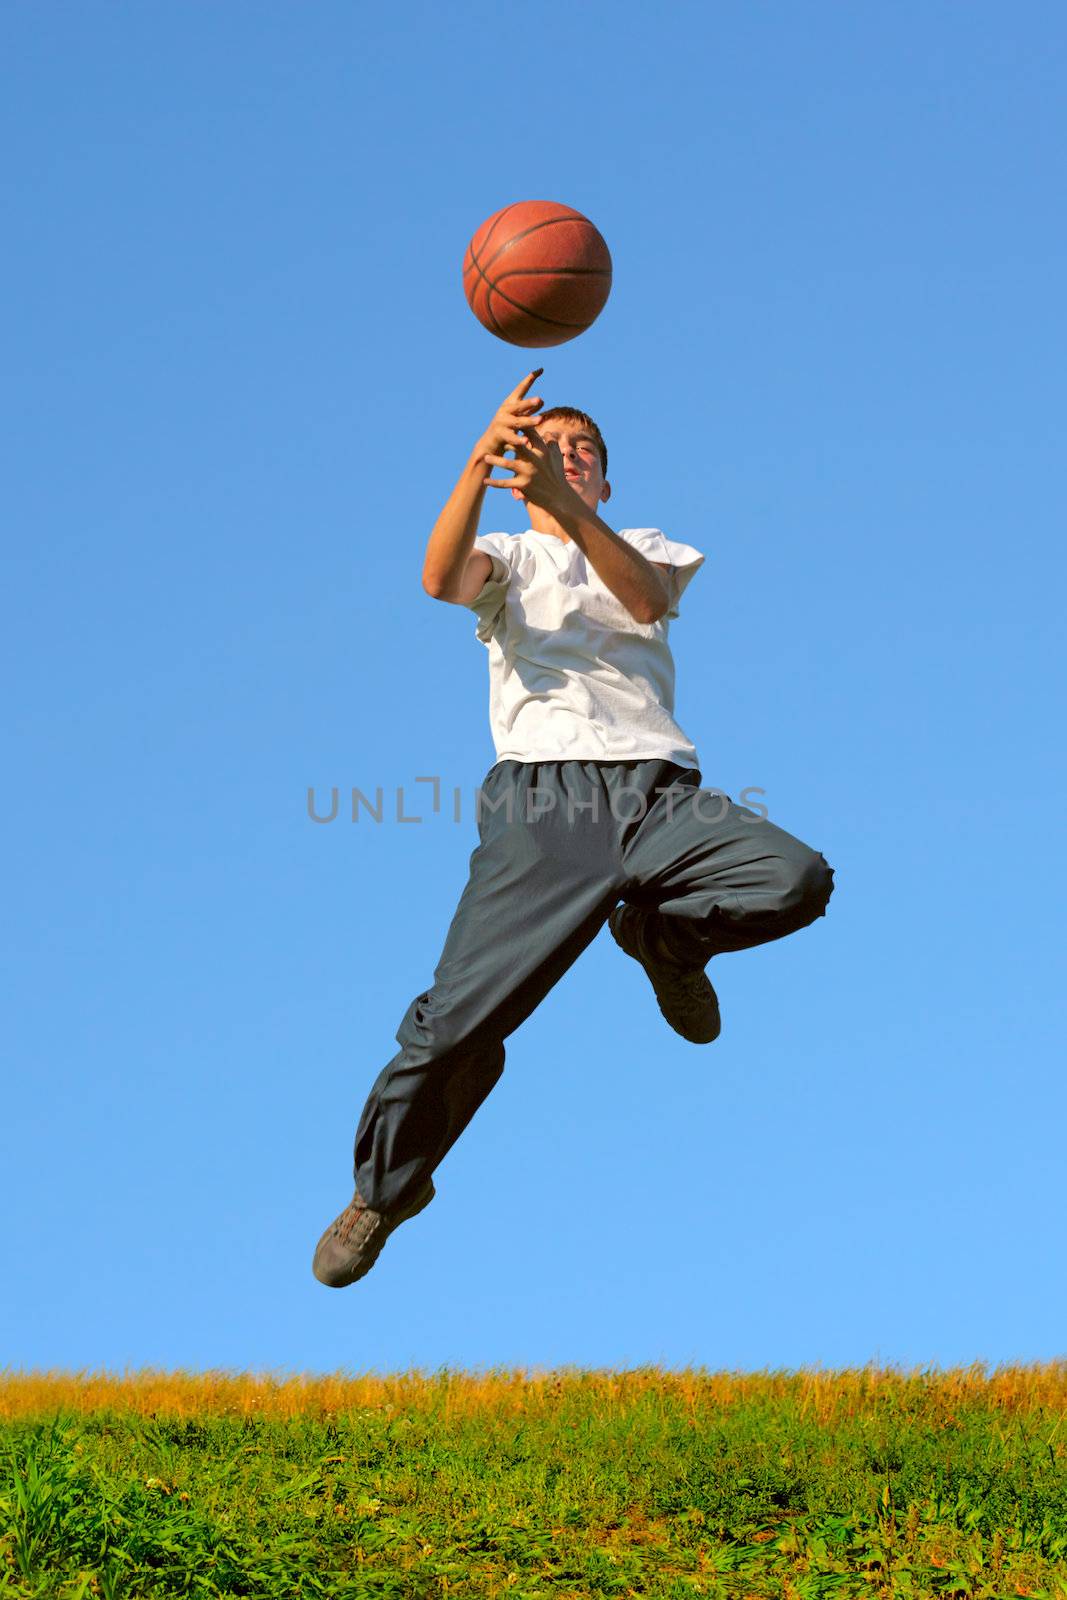 a boy dribbling a basketball in a game